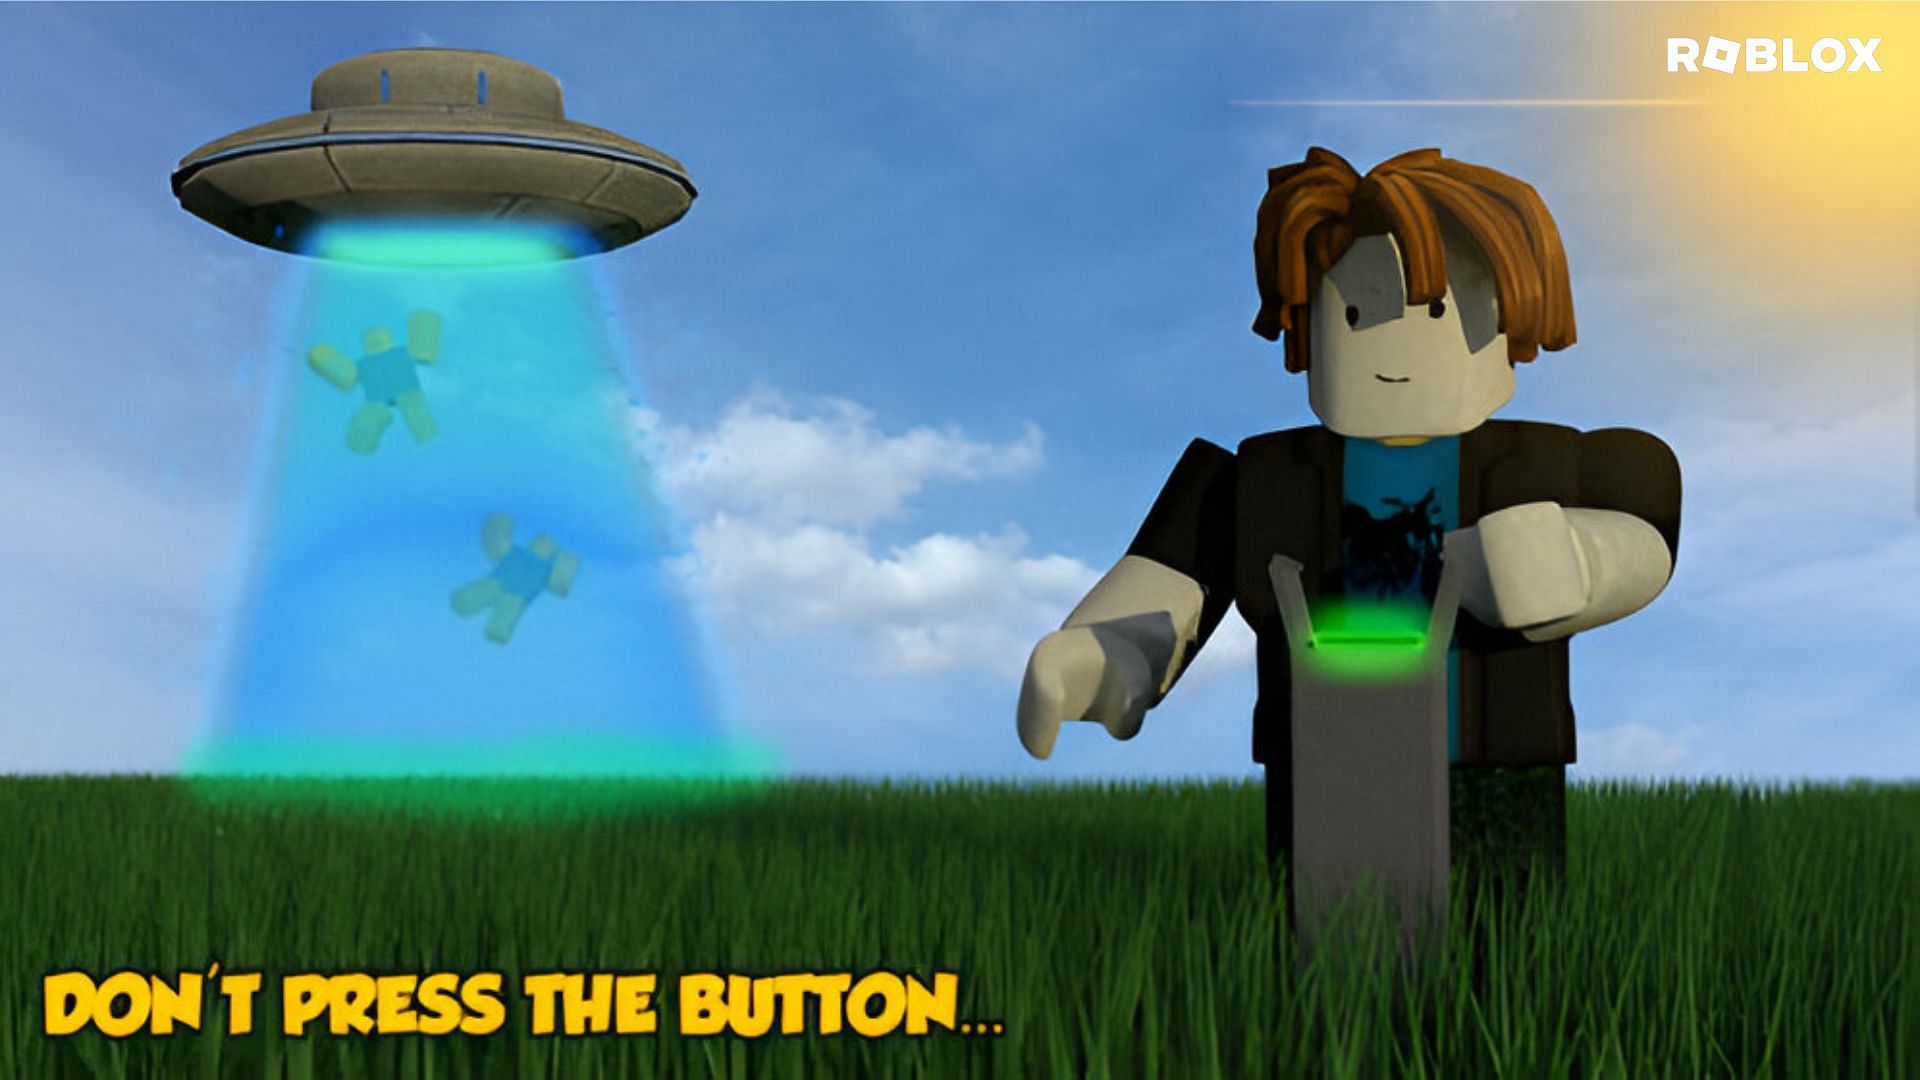 Will you press the button or not? (Image via Roblox and Sportskeeda)